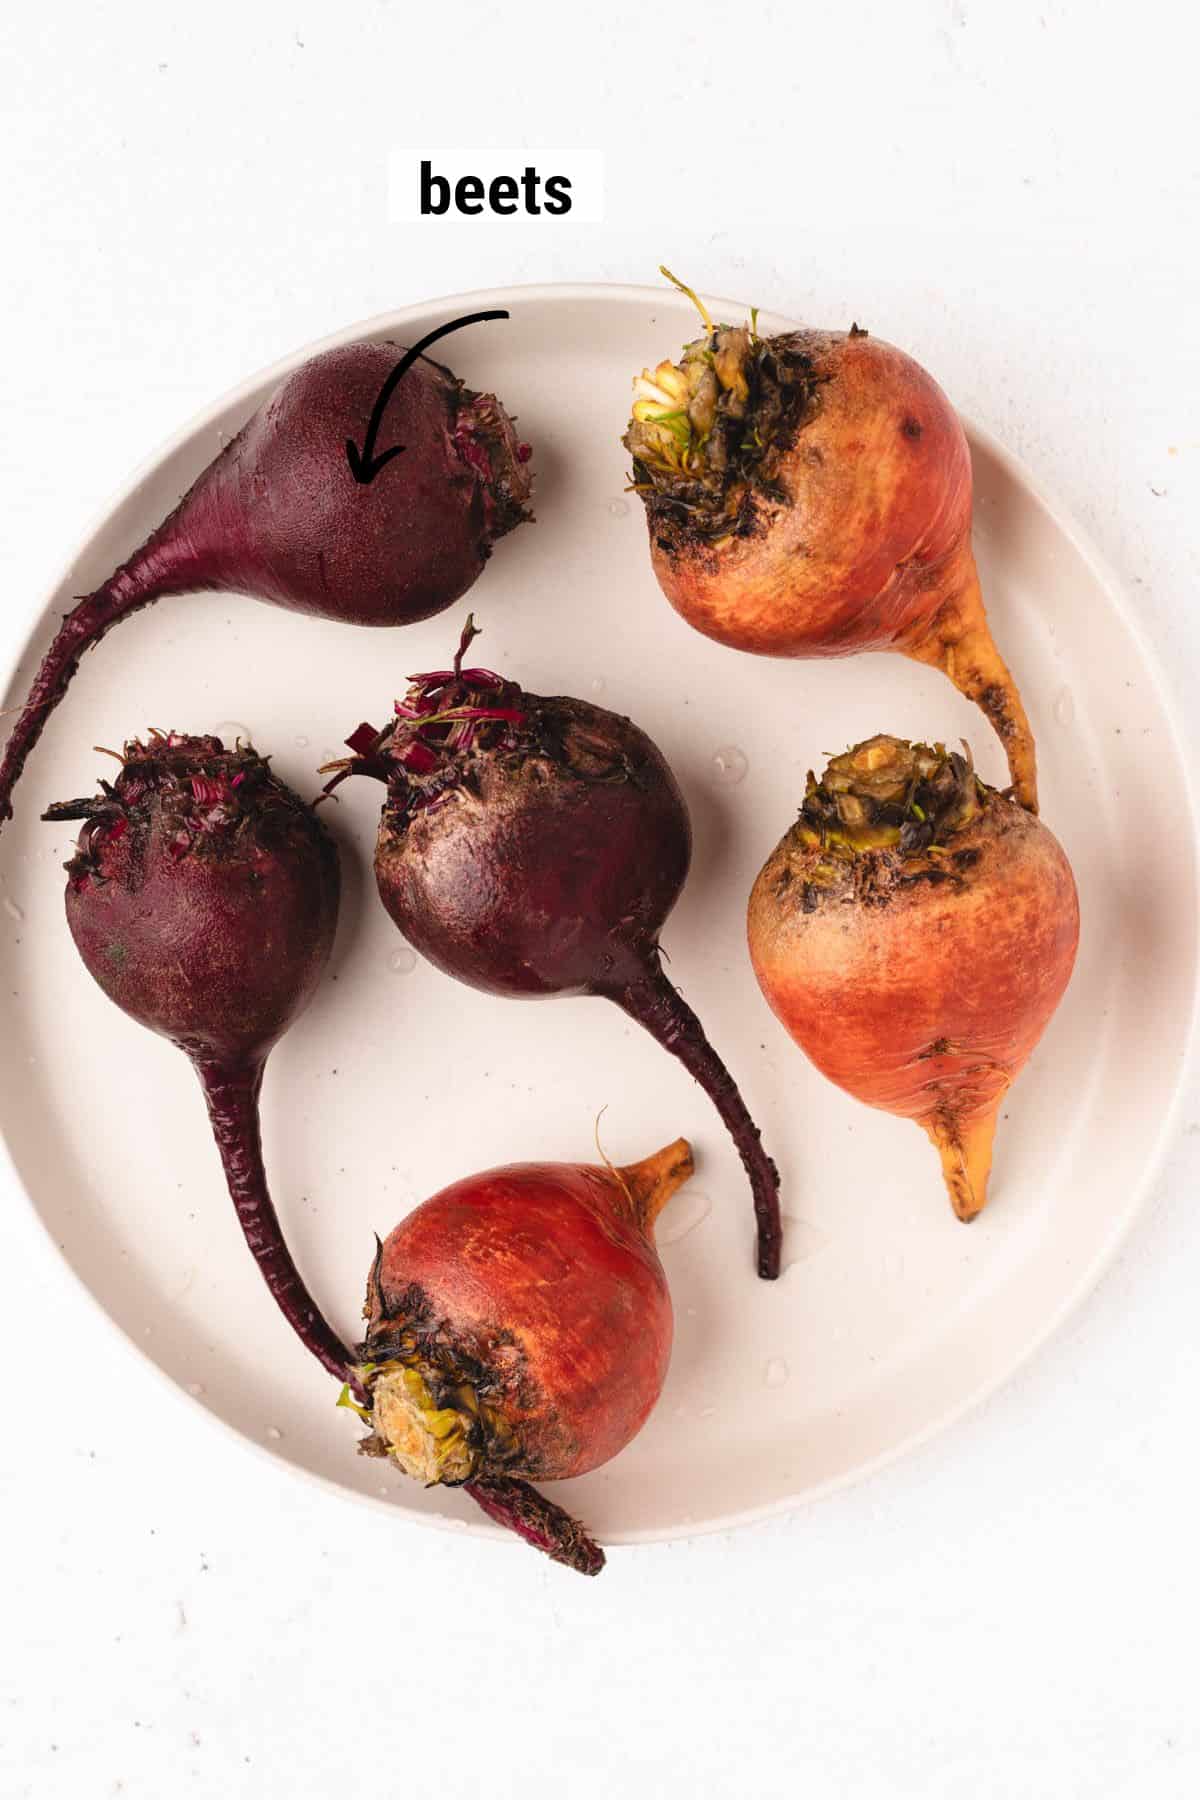 Red and golden beets on a large round plate.